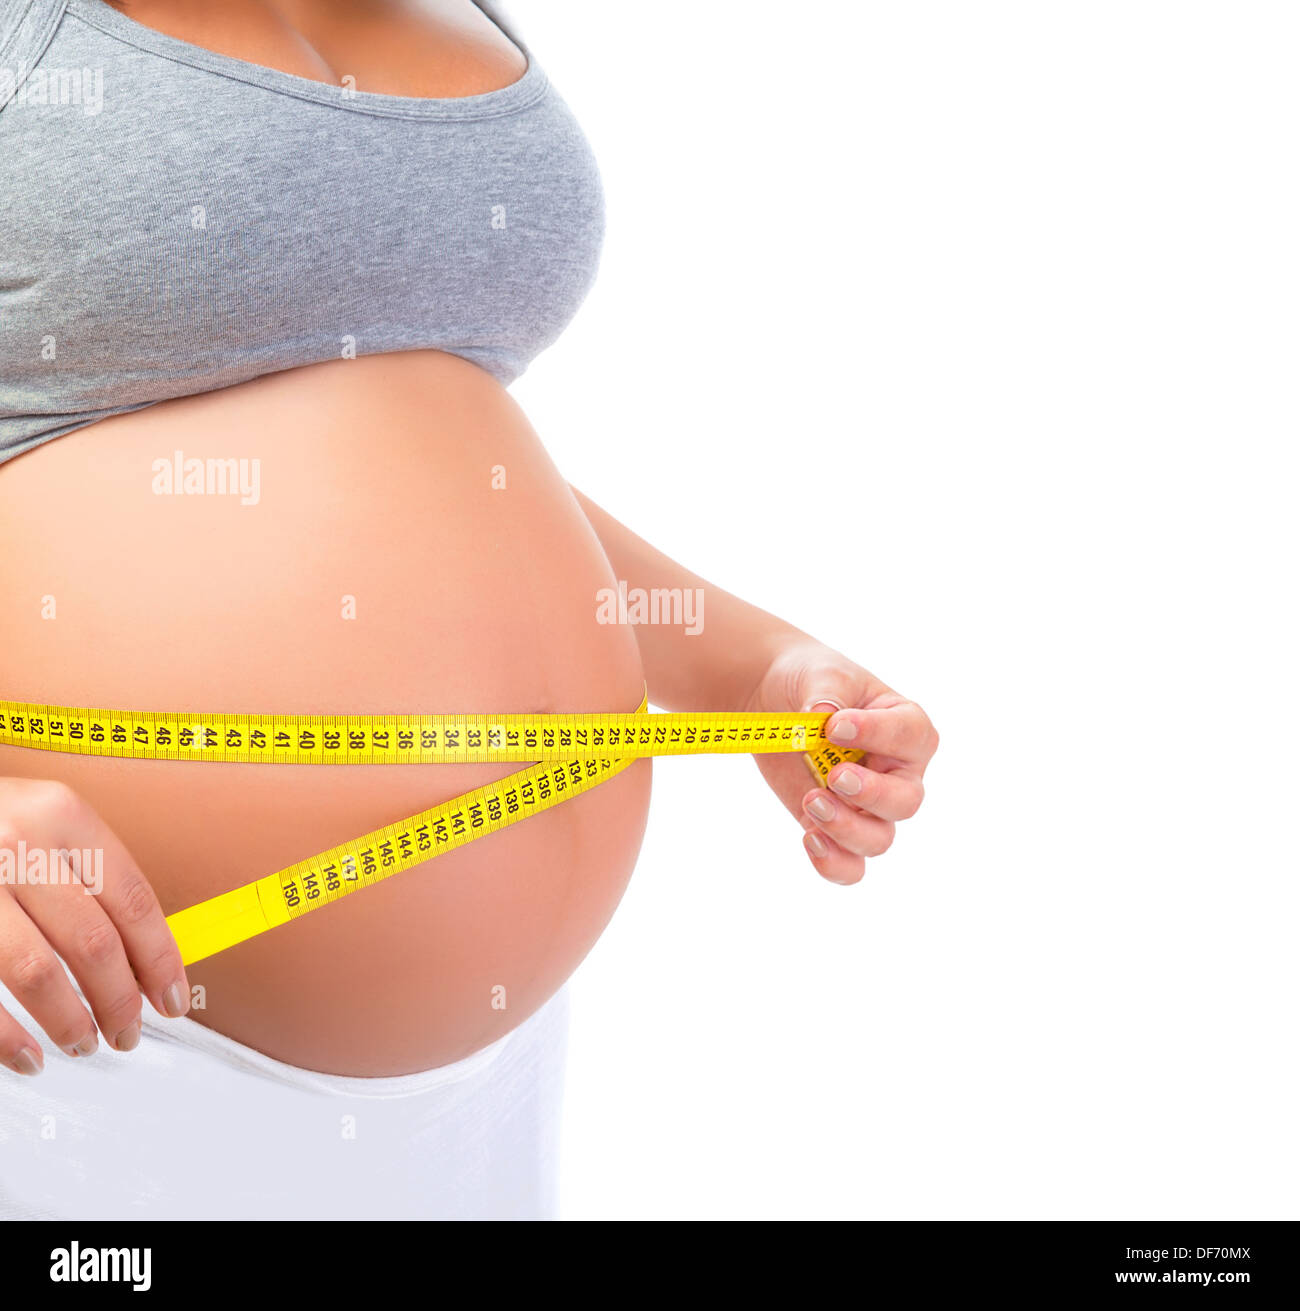 Pregnant female measuring belly, body part, child care, tummy size control, happy young family, new life concept Stock Photo